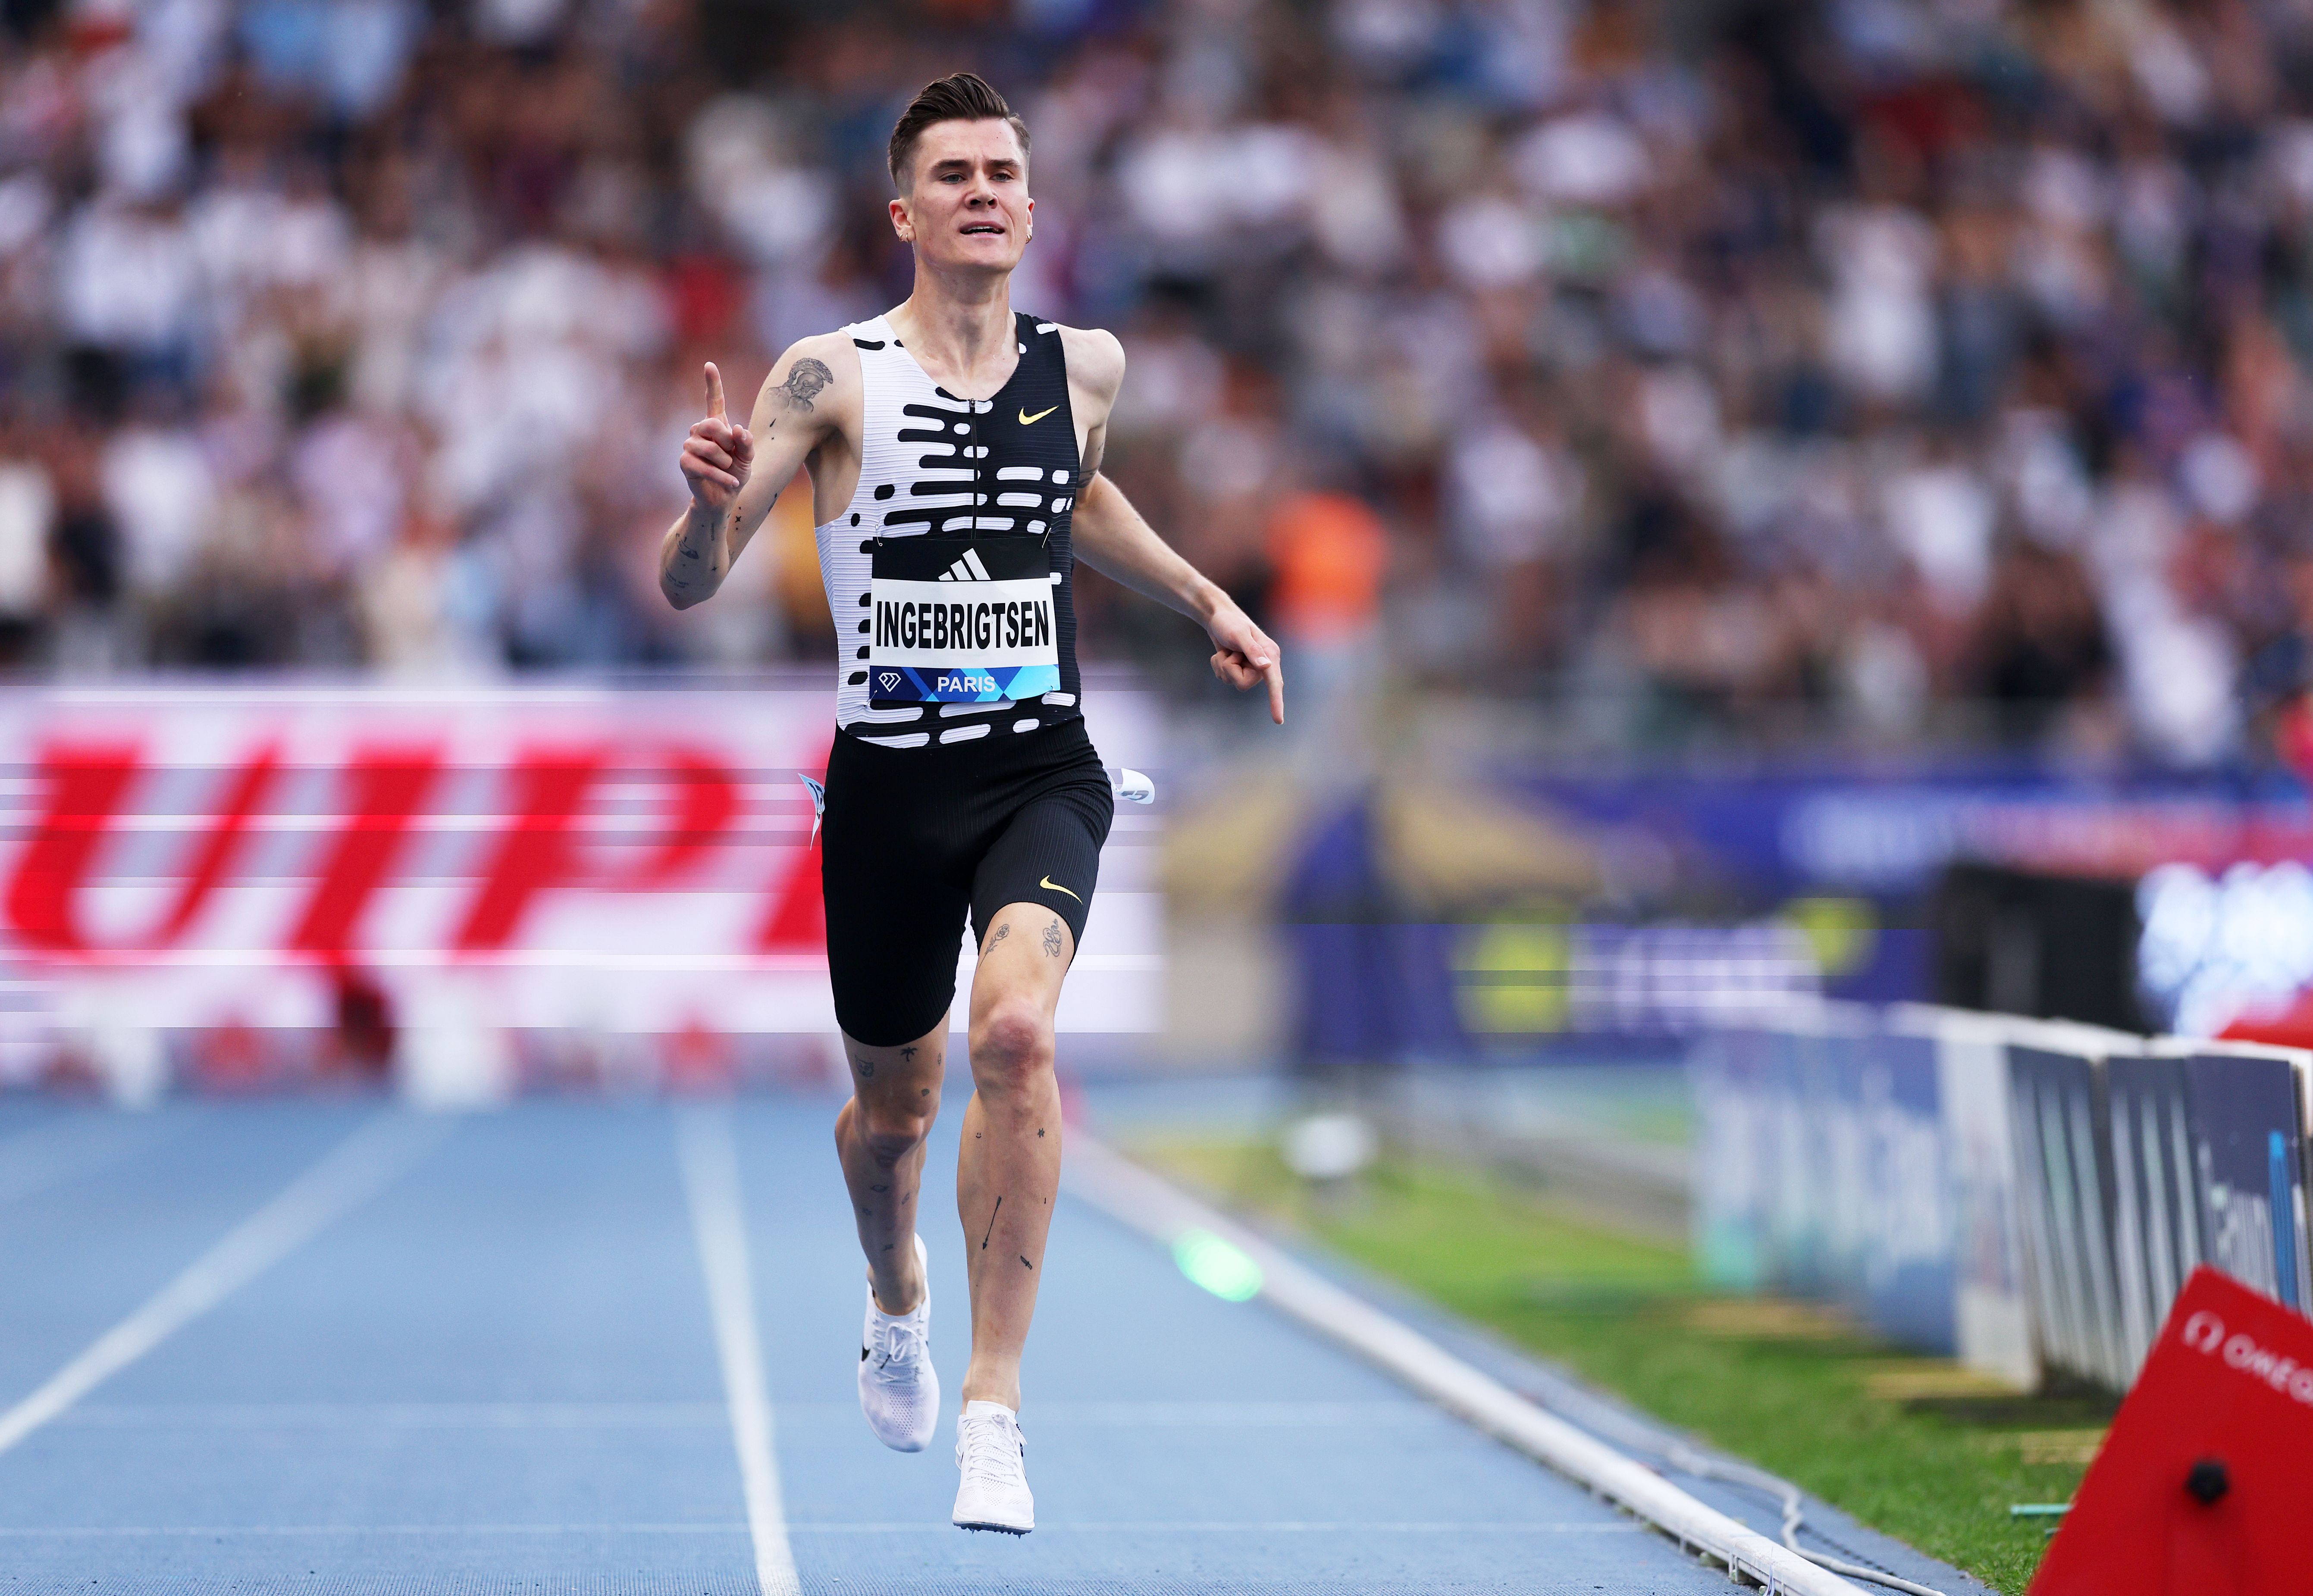 Jakob Ingebrigtsen sets a world best for two miles at the Wanda Diamond League meeting in Paris